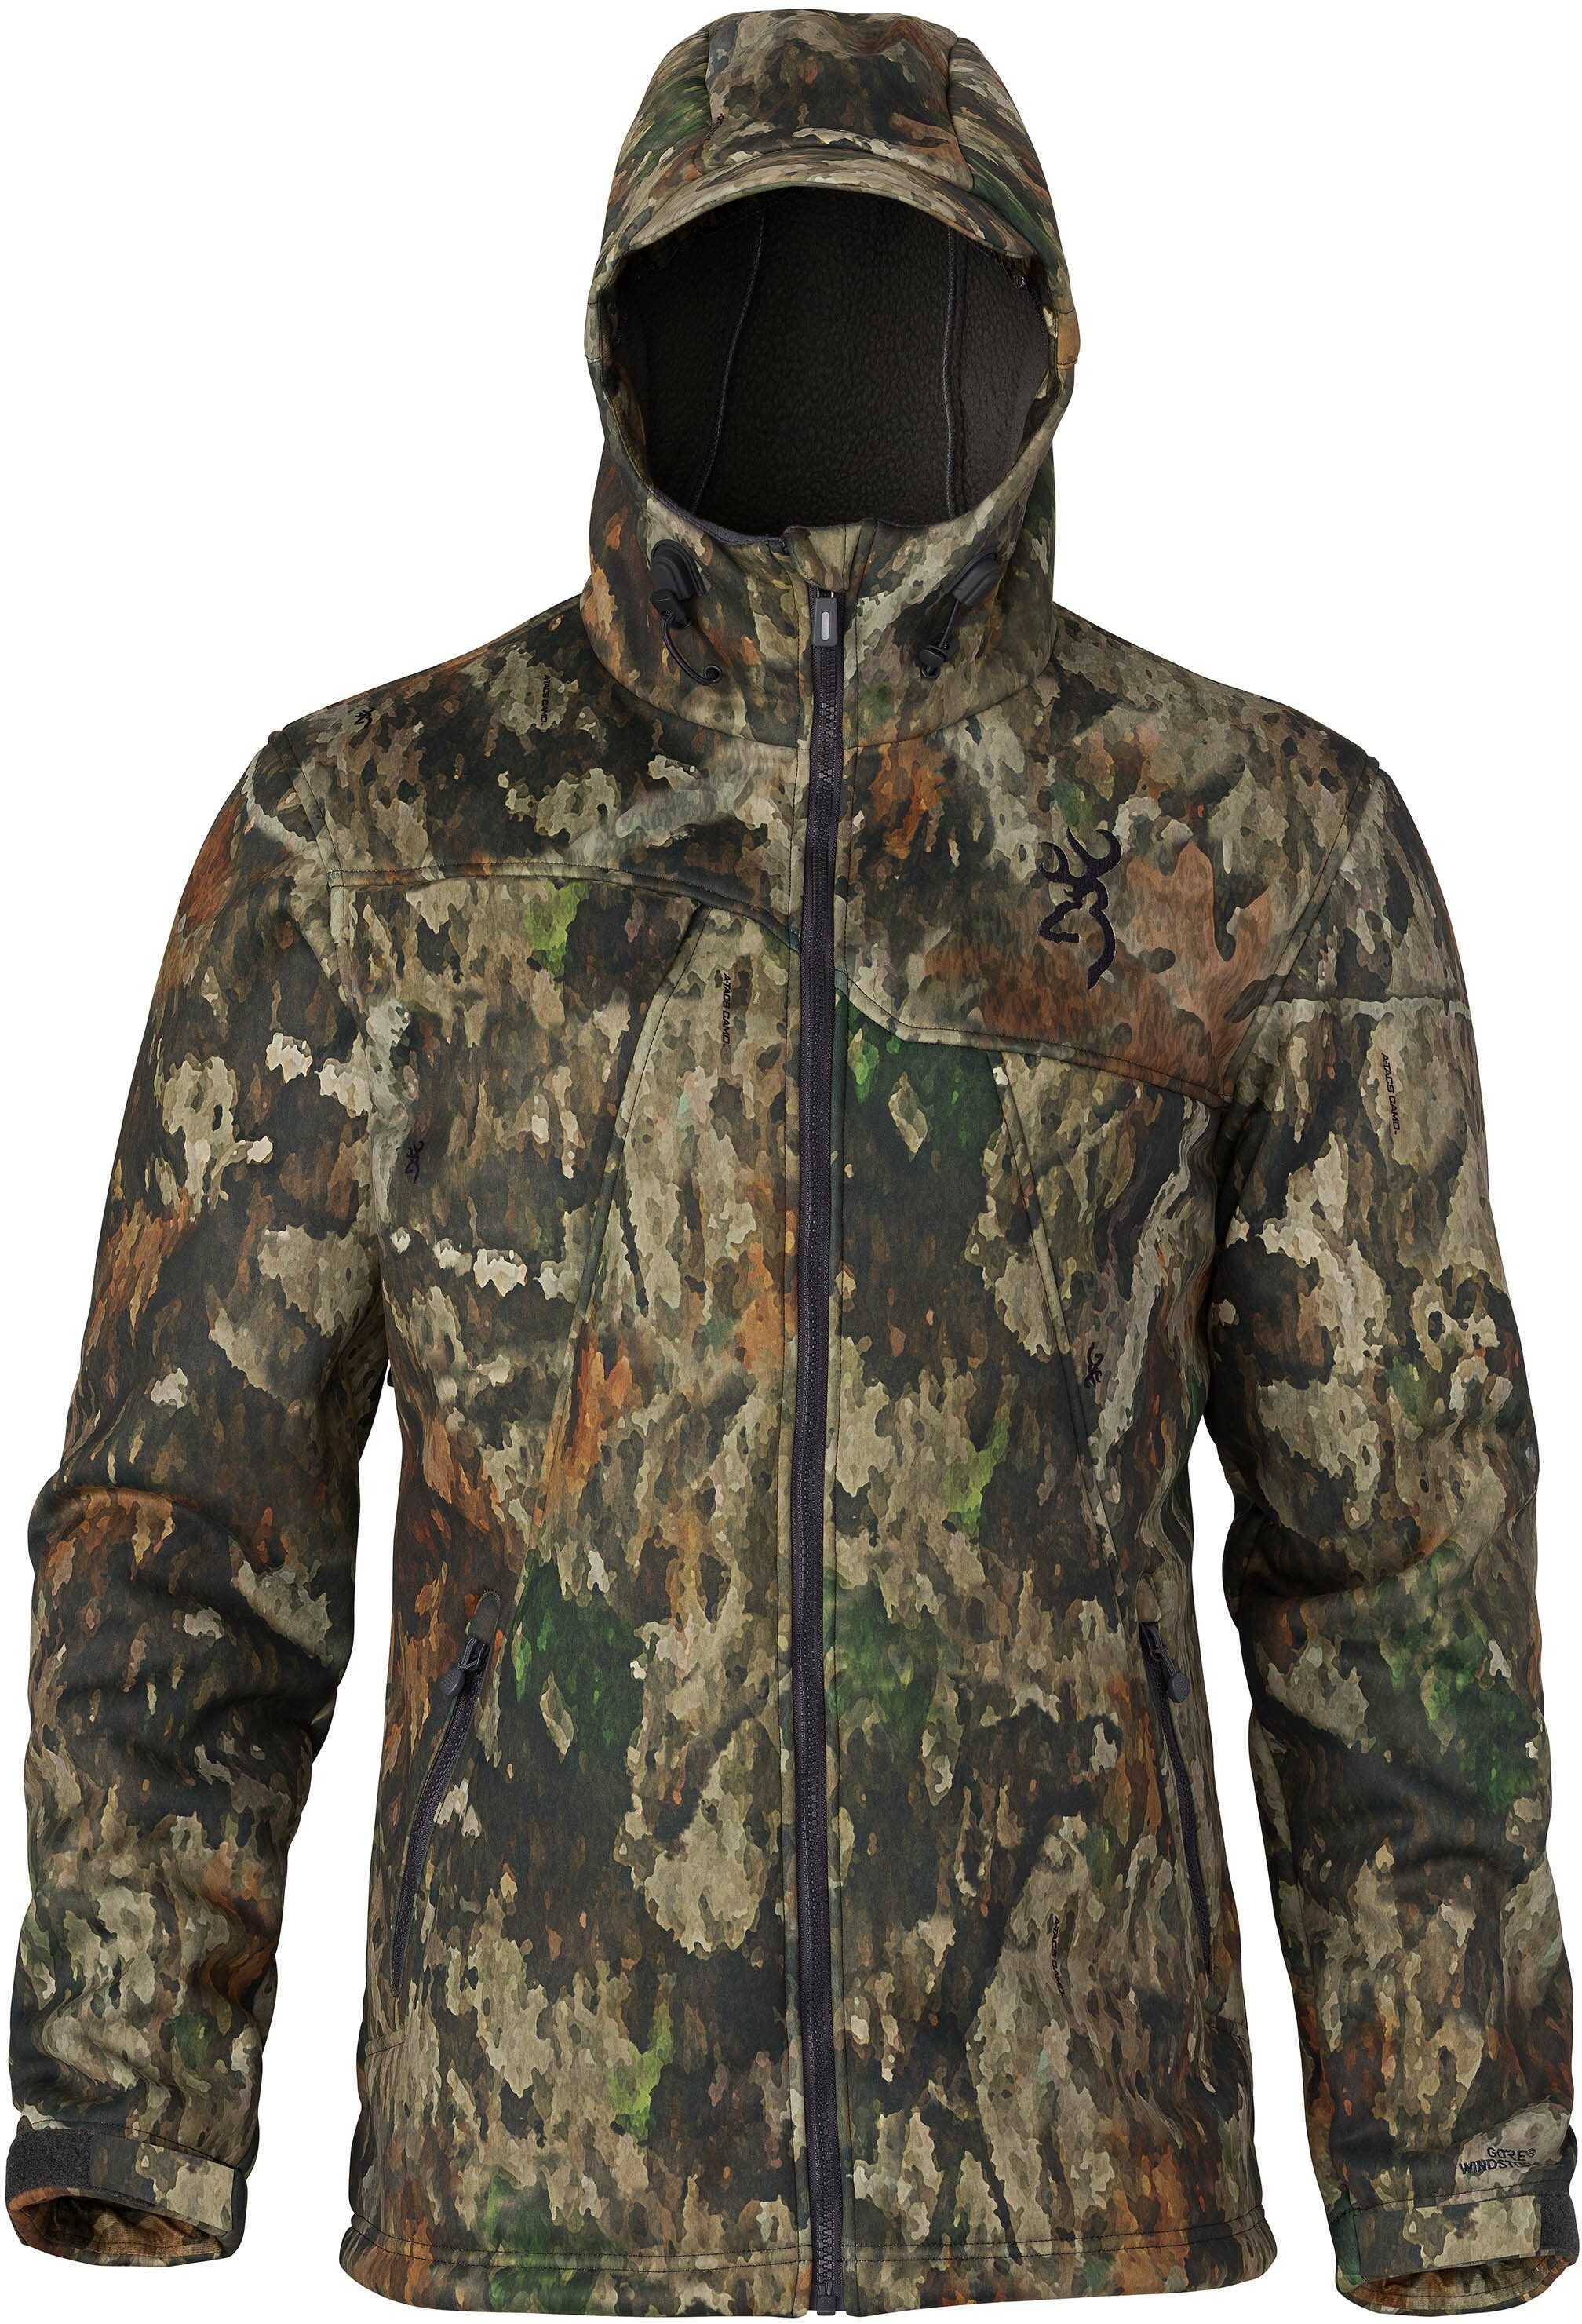 Browning Hell's Canyon Speed Hellfire-FM Insulated Gore Windstopper Jacket ATACS Tree/Dirt Extreme, Large